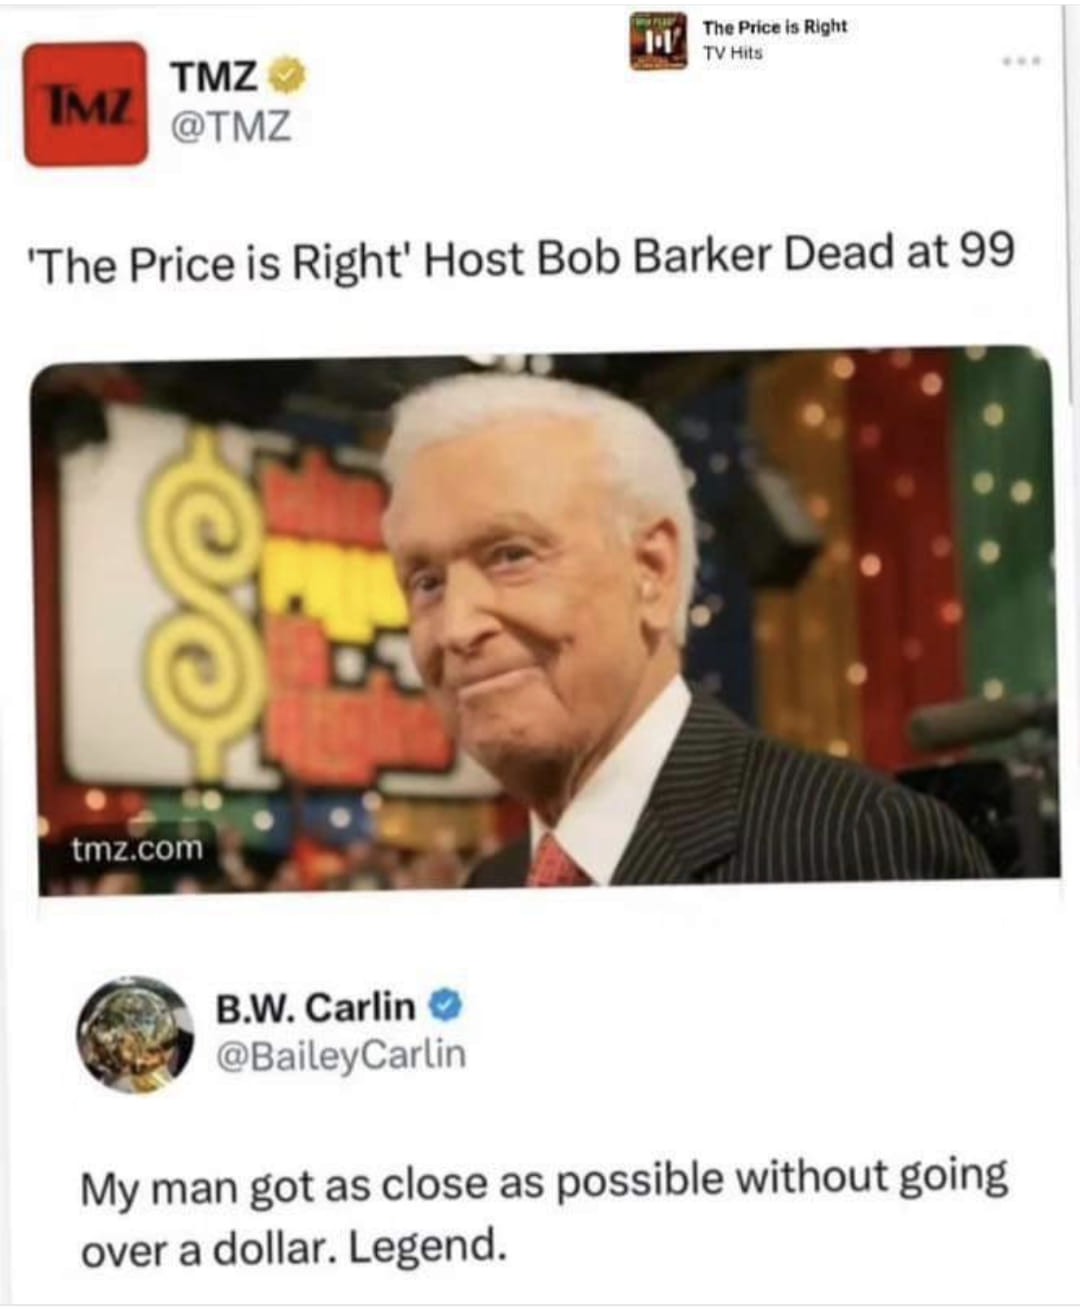 my man got as close as possible without going over a dollar, legend, the price is right host bob barker dead at 99